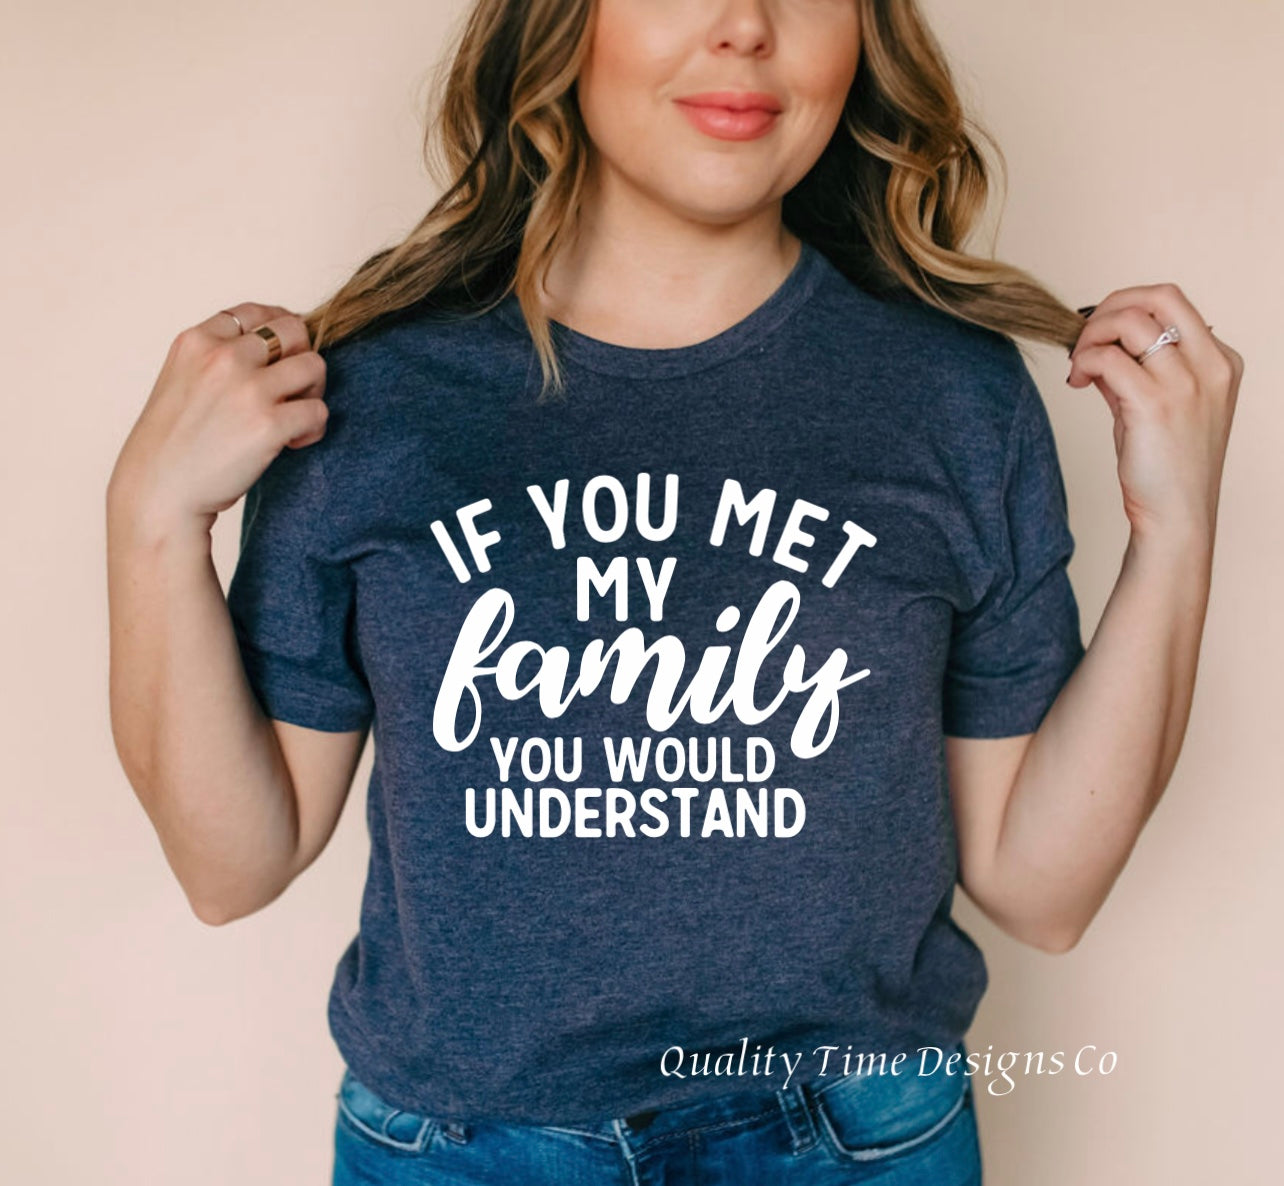 If you met my family you would understand t-shirt 